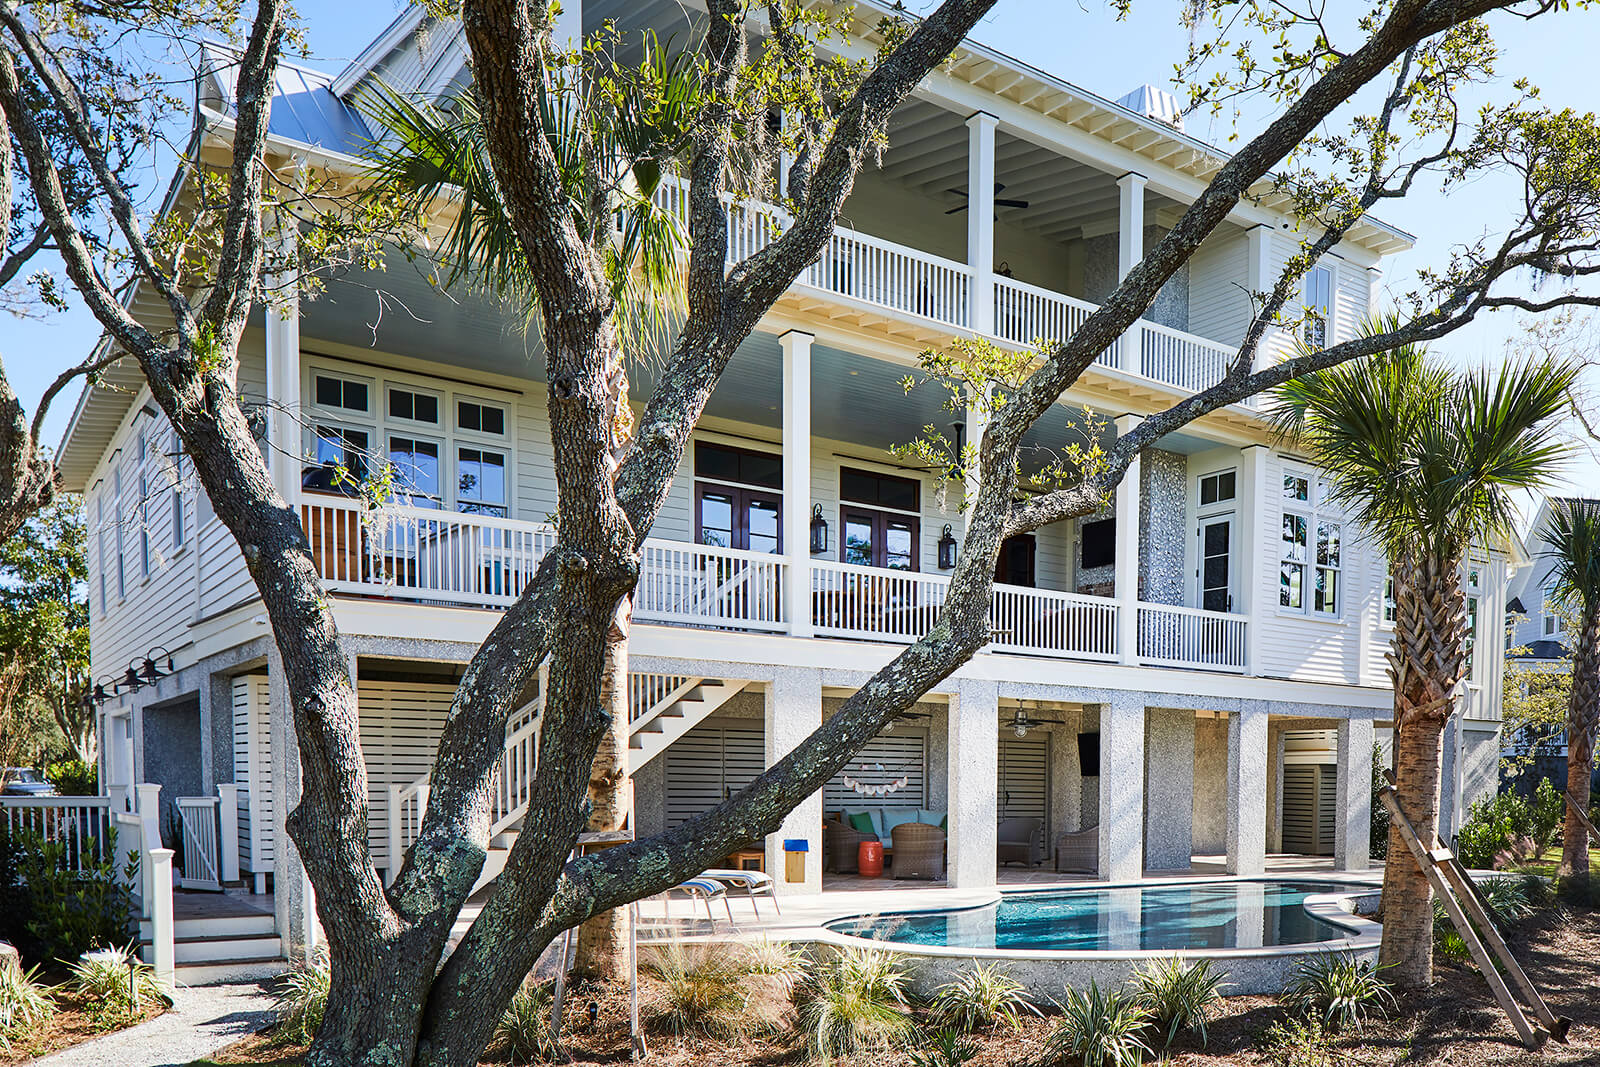 Exterior of Daniel’s Island home in Charleston, South Carolina featuring a pool and two porches on the back of the home.